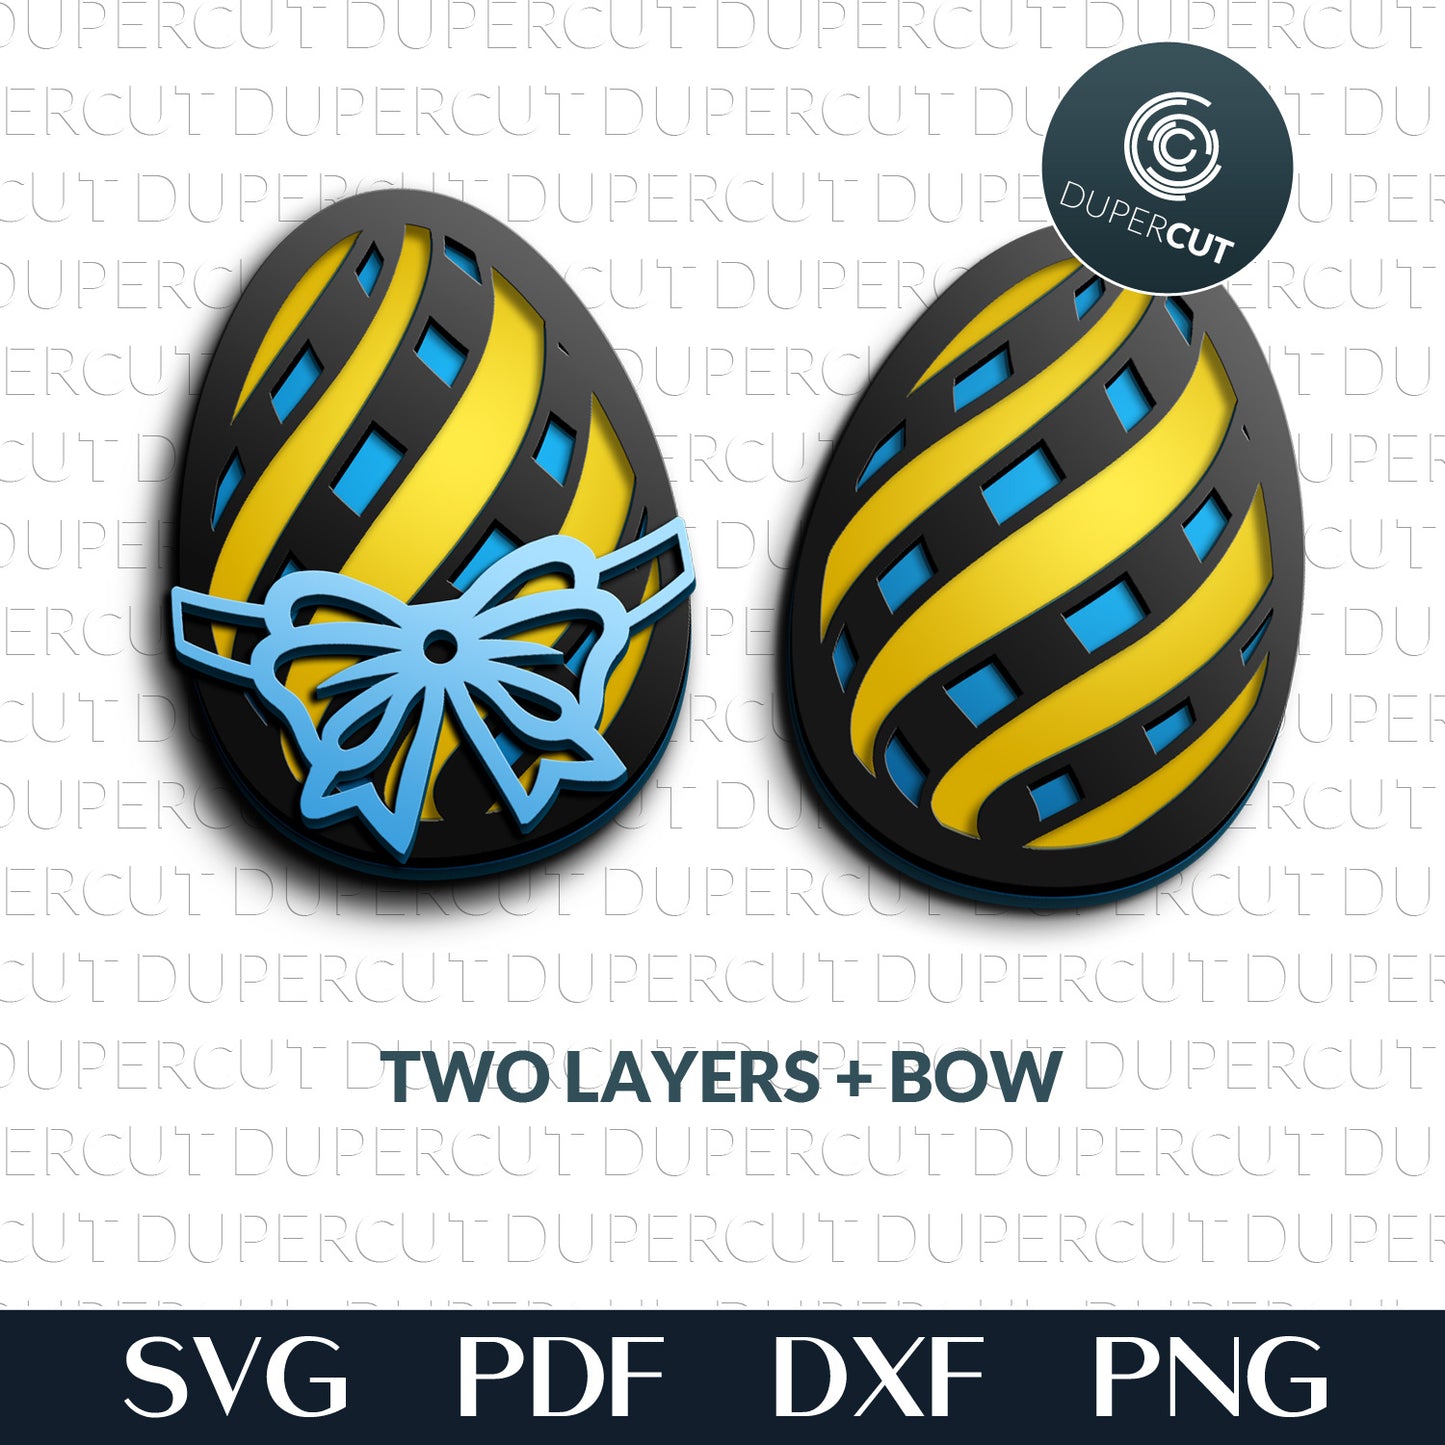 Easter egg with basket weave pattern and a bow - SVG DXF layered cutting files for Glowforge, Cricut, Silhouette Cameo, scroll saw by DuperCut.com